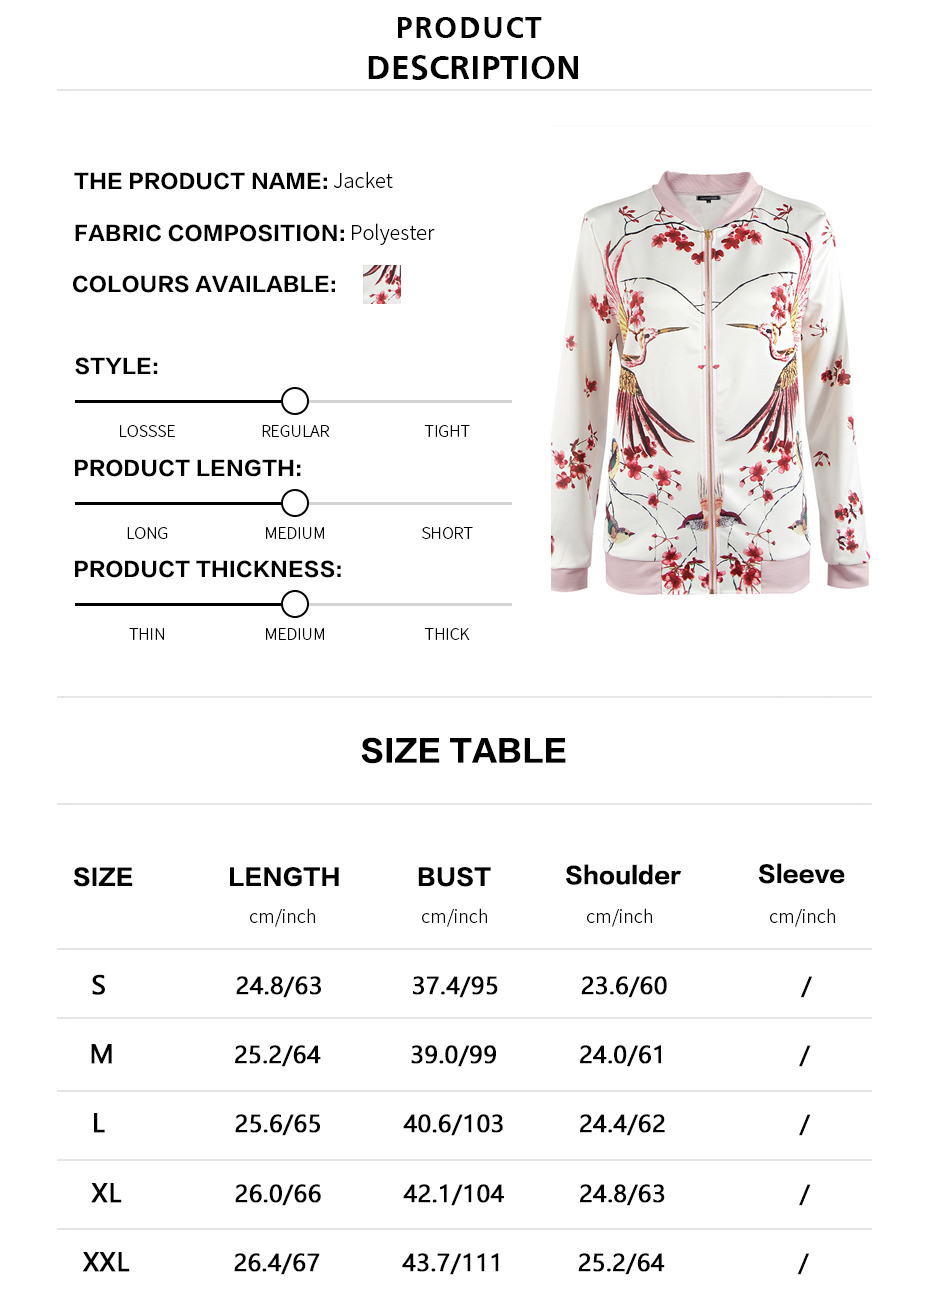 HDY-Haoduoyi-Phoenix-Print-White-Bomber-Jacket-Exotic-Stand-Collar-Zipper-Pink-Jacket-Casual-Loose-S-32743555170